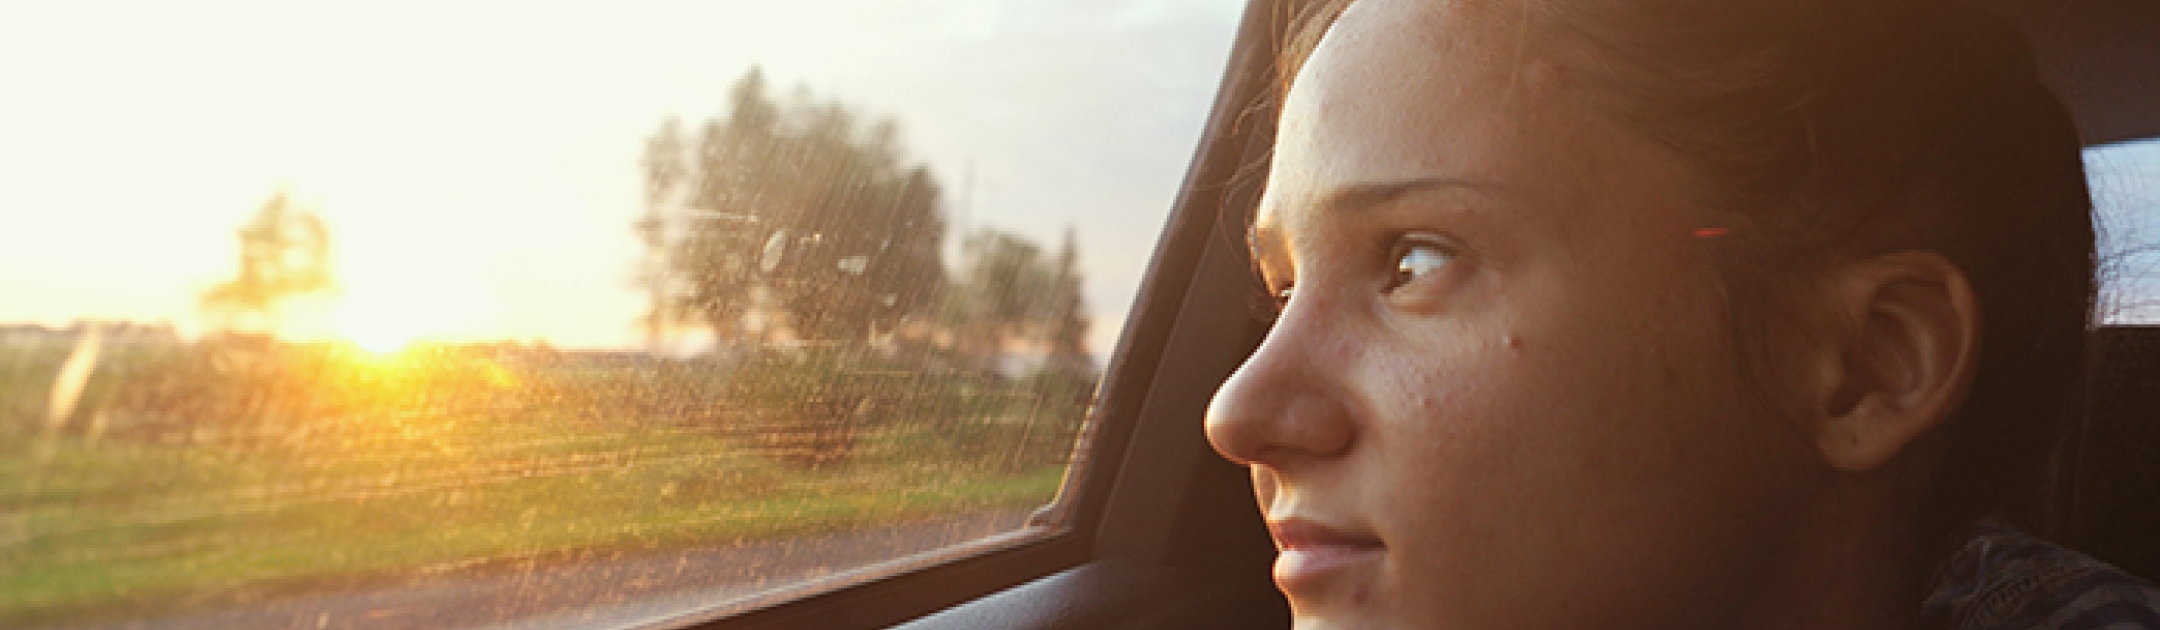 Teenager looking out the window of a car into the sunset 